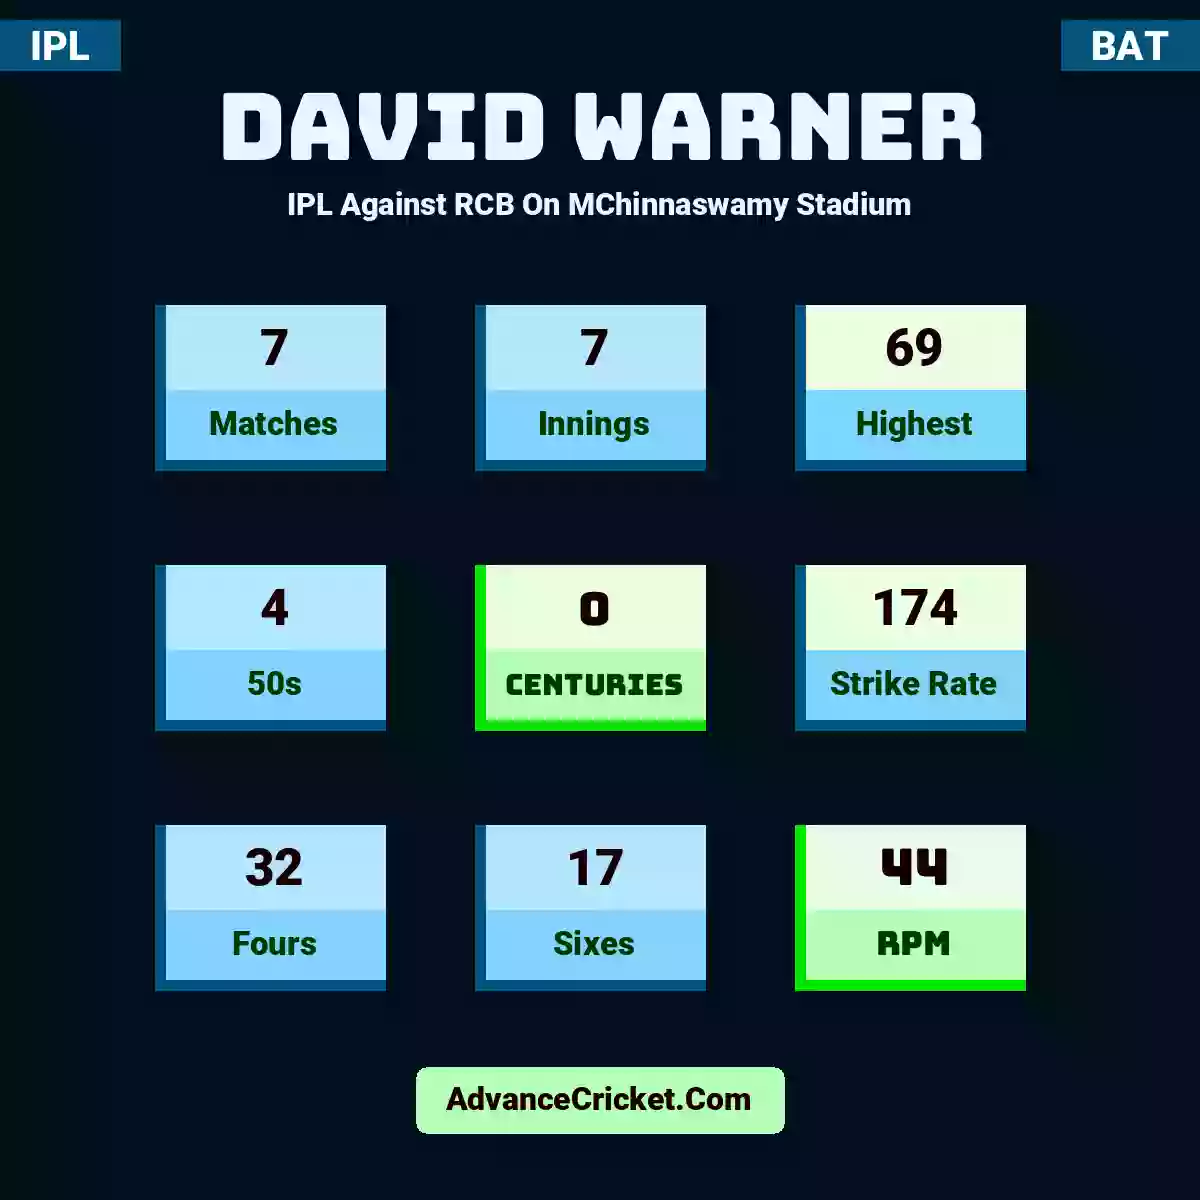 David Warner IPL  Against RCB On MChinnaswamy Stadium, David Warner played 7 matches, scored 69 runs as highest, 4 half-centuries, and 0 centuries, with a strike rate of 174. D.Warner hit 32 fours and 17 sixes, with an RPM of 44.